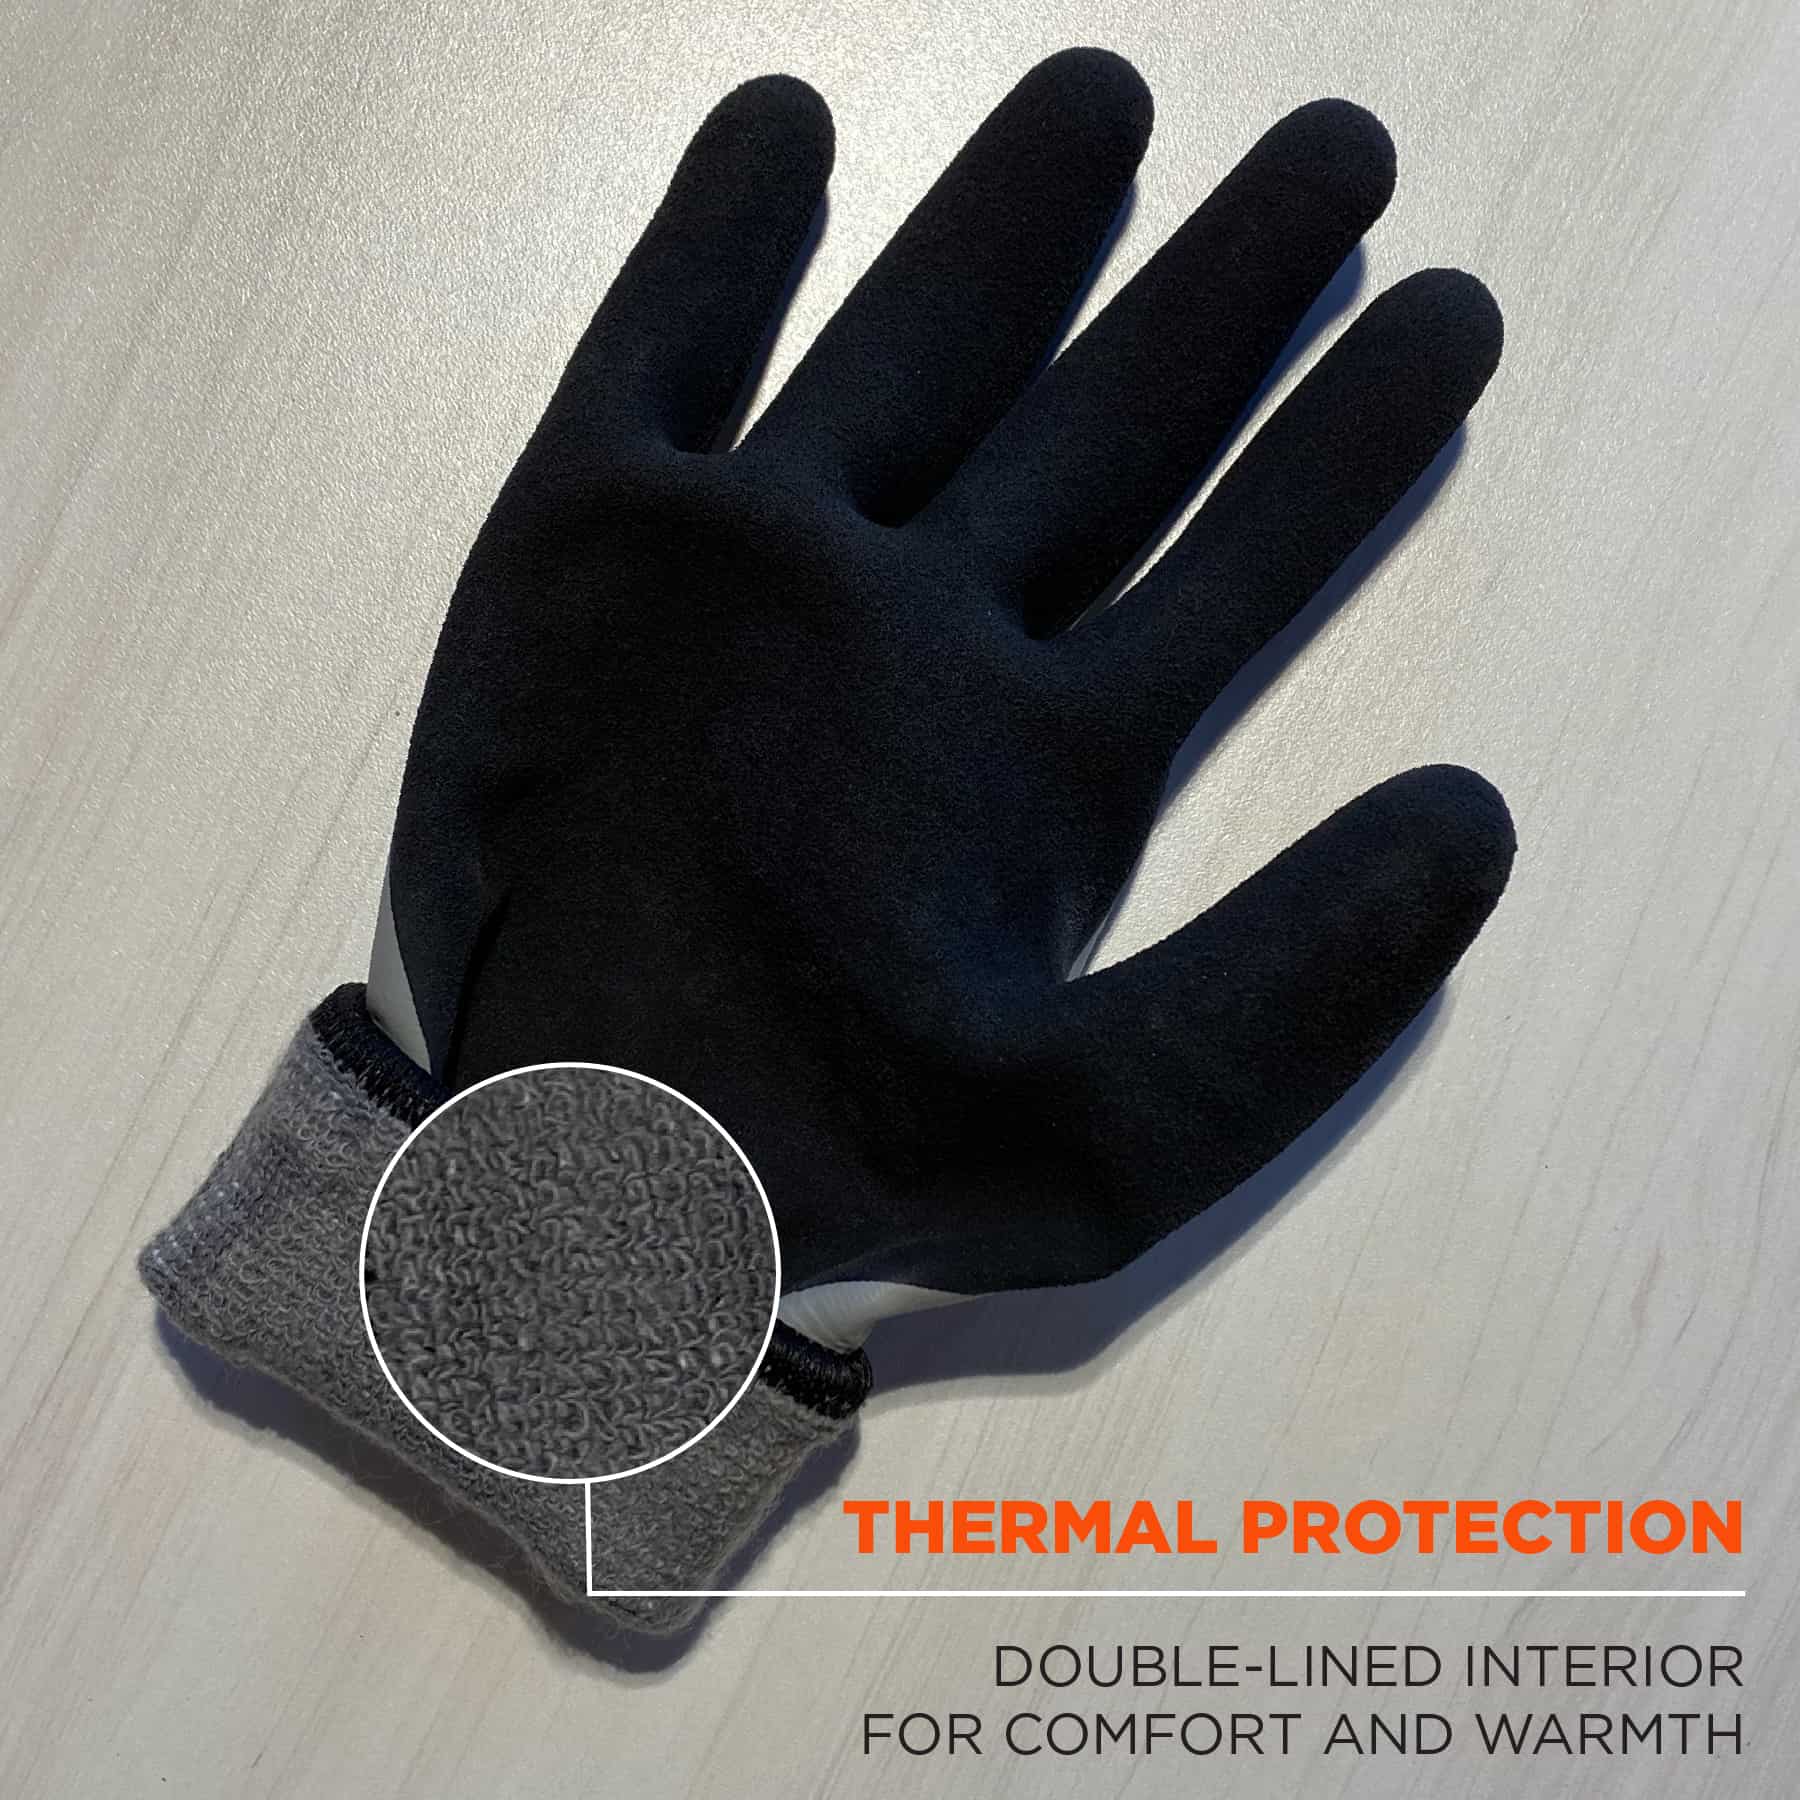 https://www.ergodyne.com/sites/default/files/product-images/17632-7501-coated-waterproof-winter-work-gloves-gray-thermal-protection_0.jpg